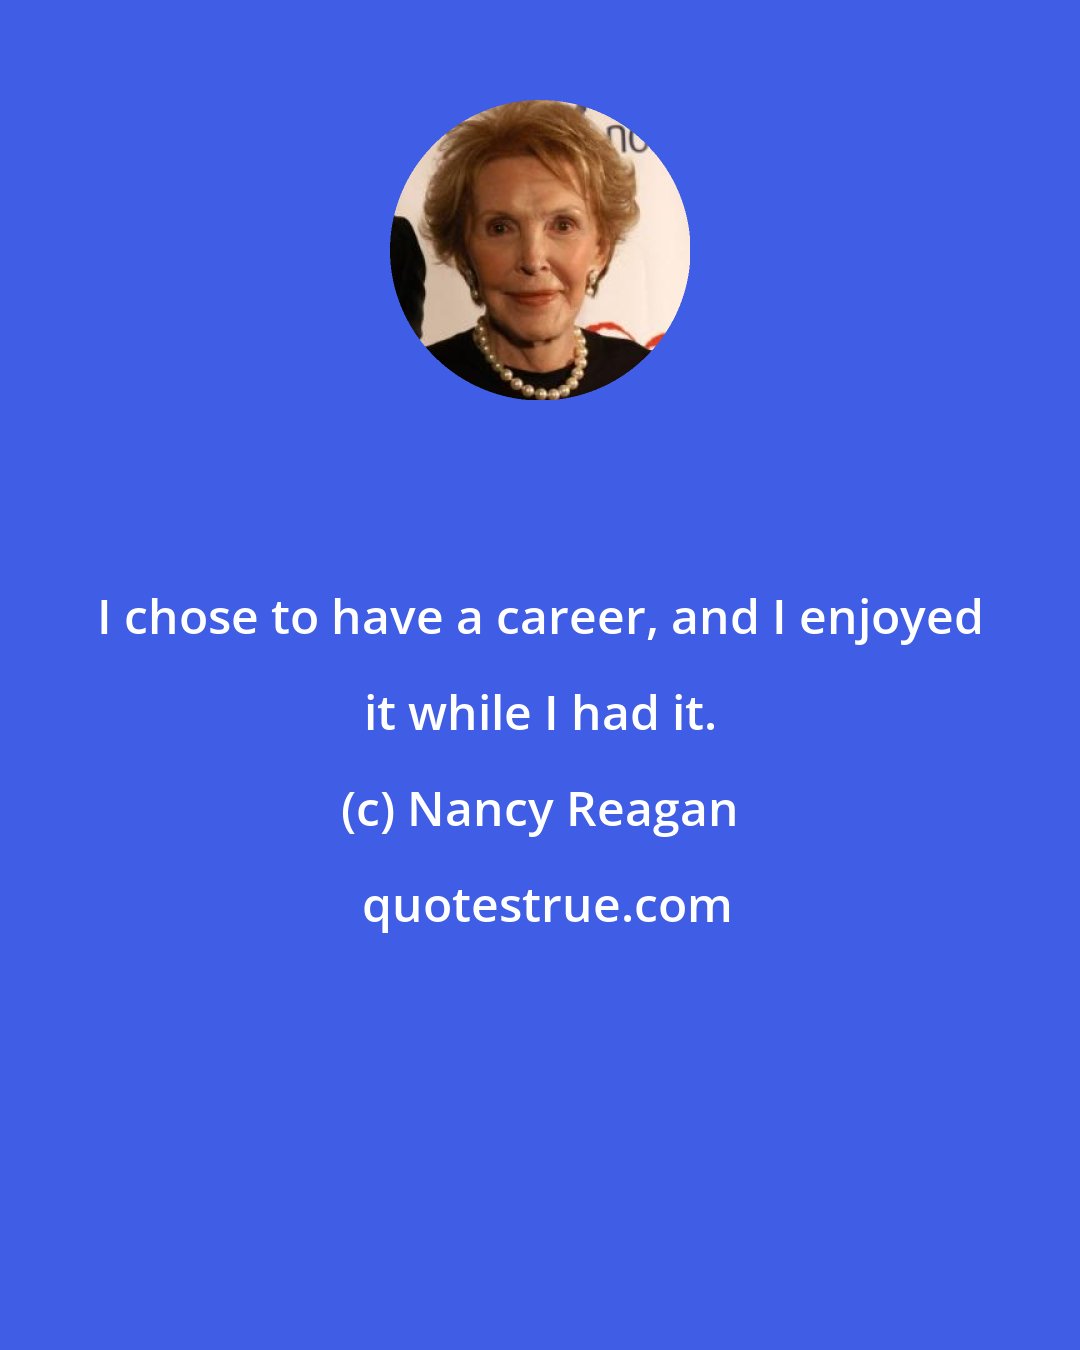 Nancy Reagan: I chose to have a career, and I enjoyed it while I had it.